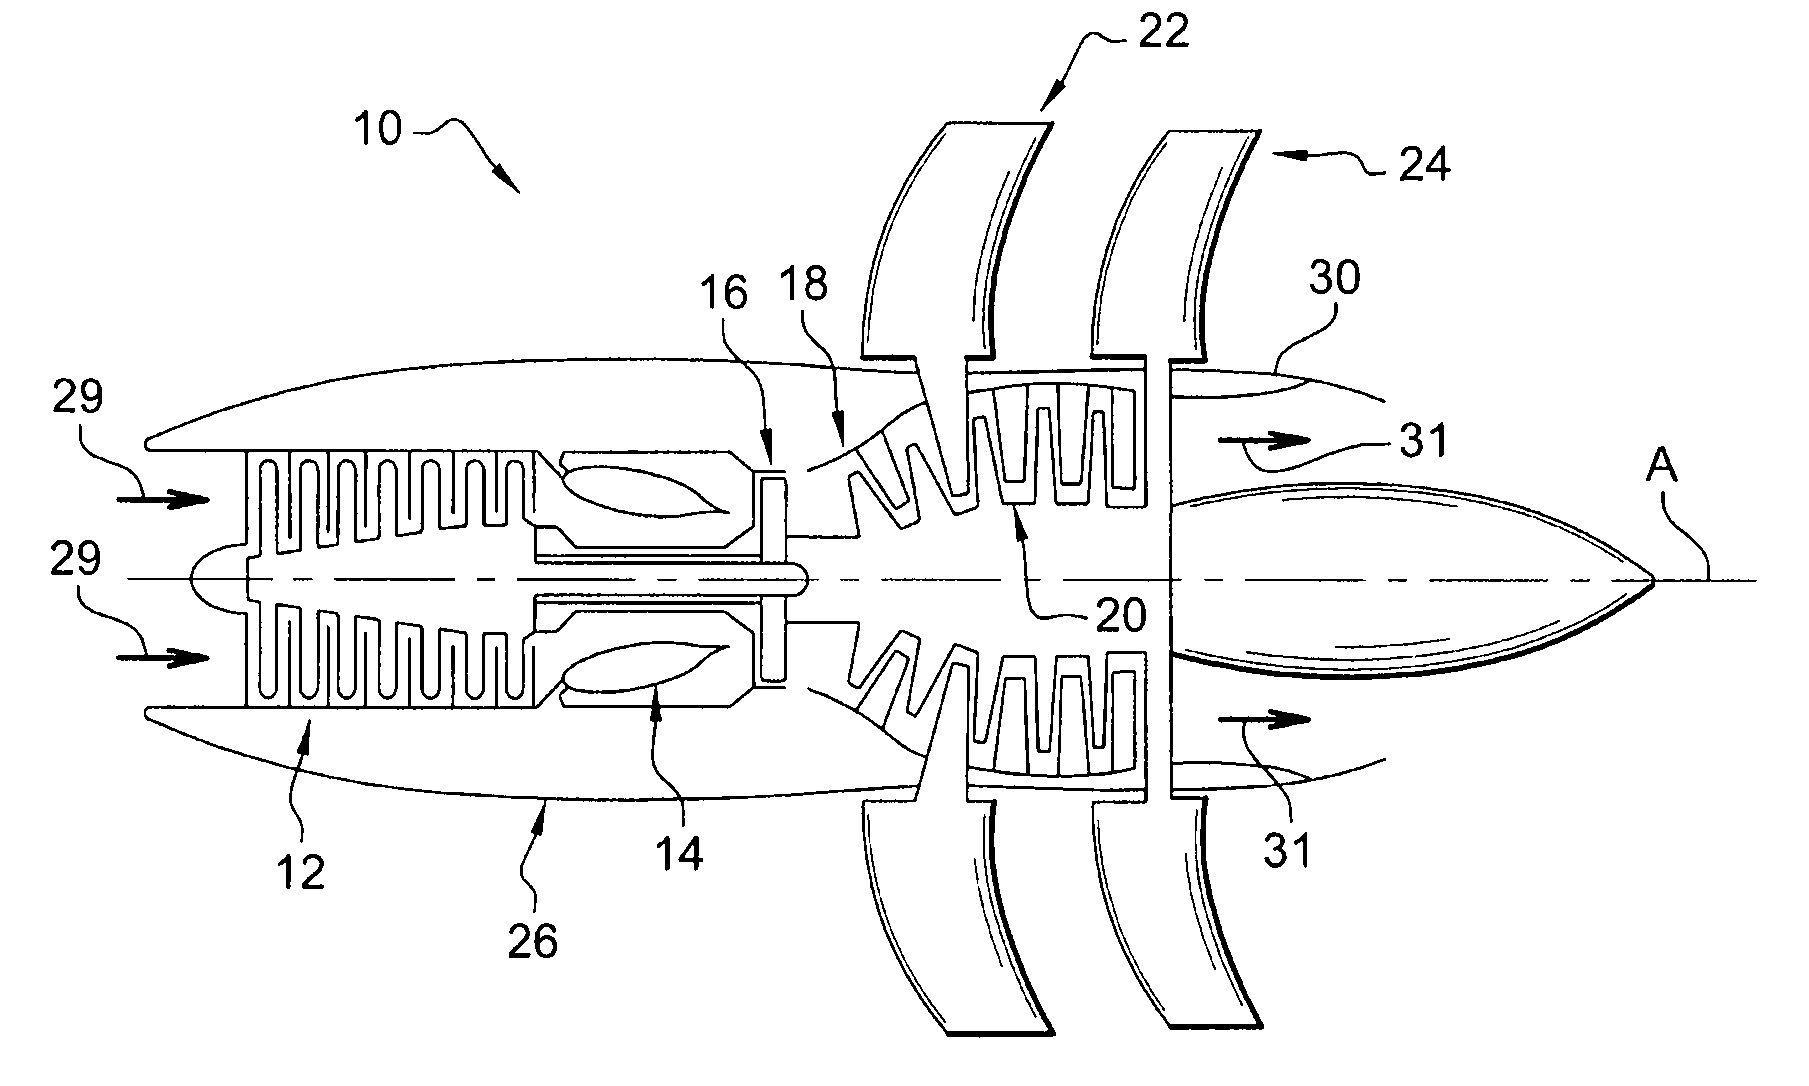 Turbomachine with unducted propellers